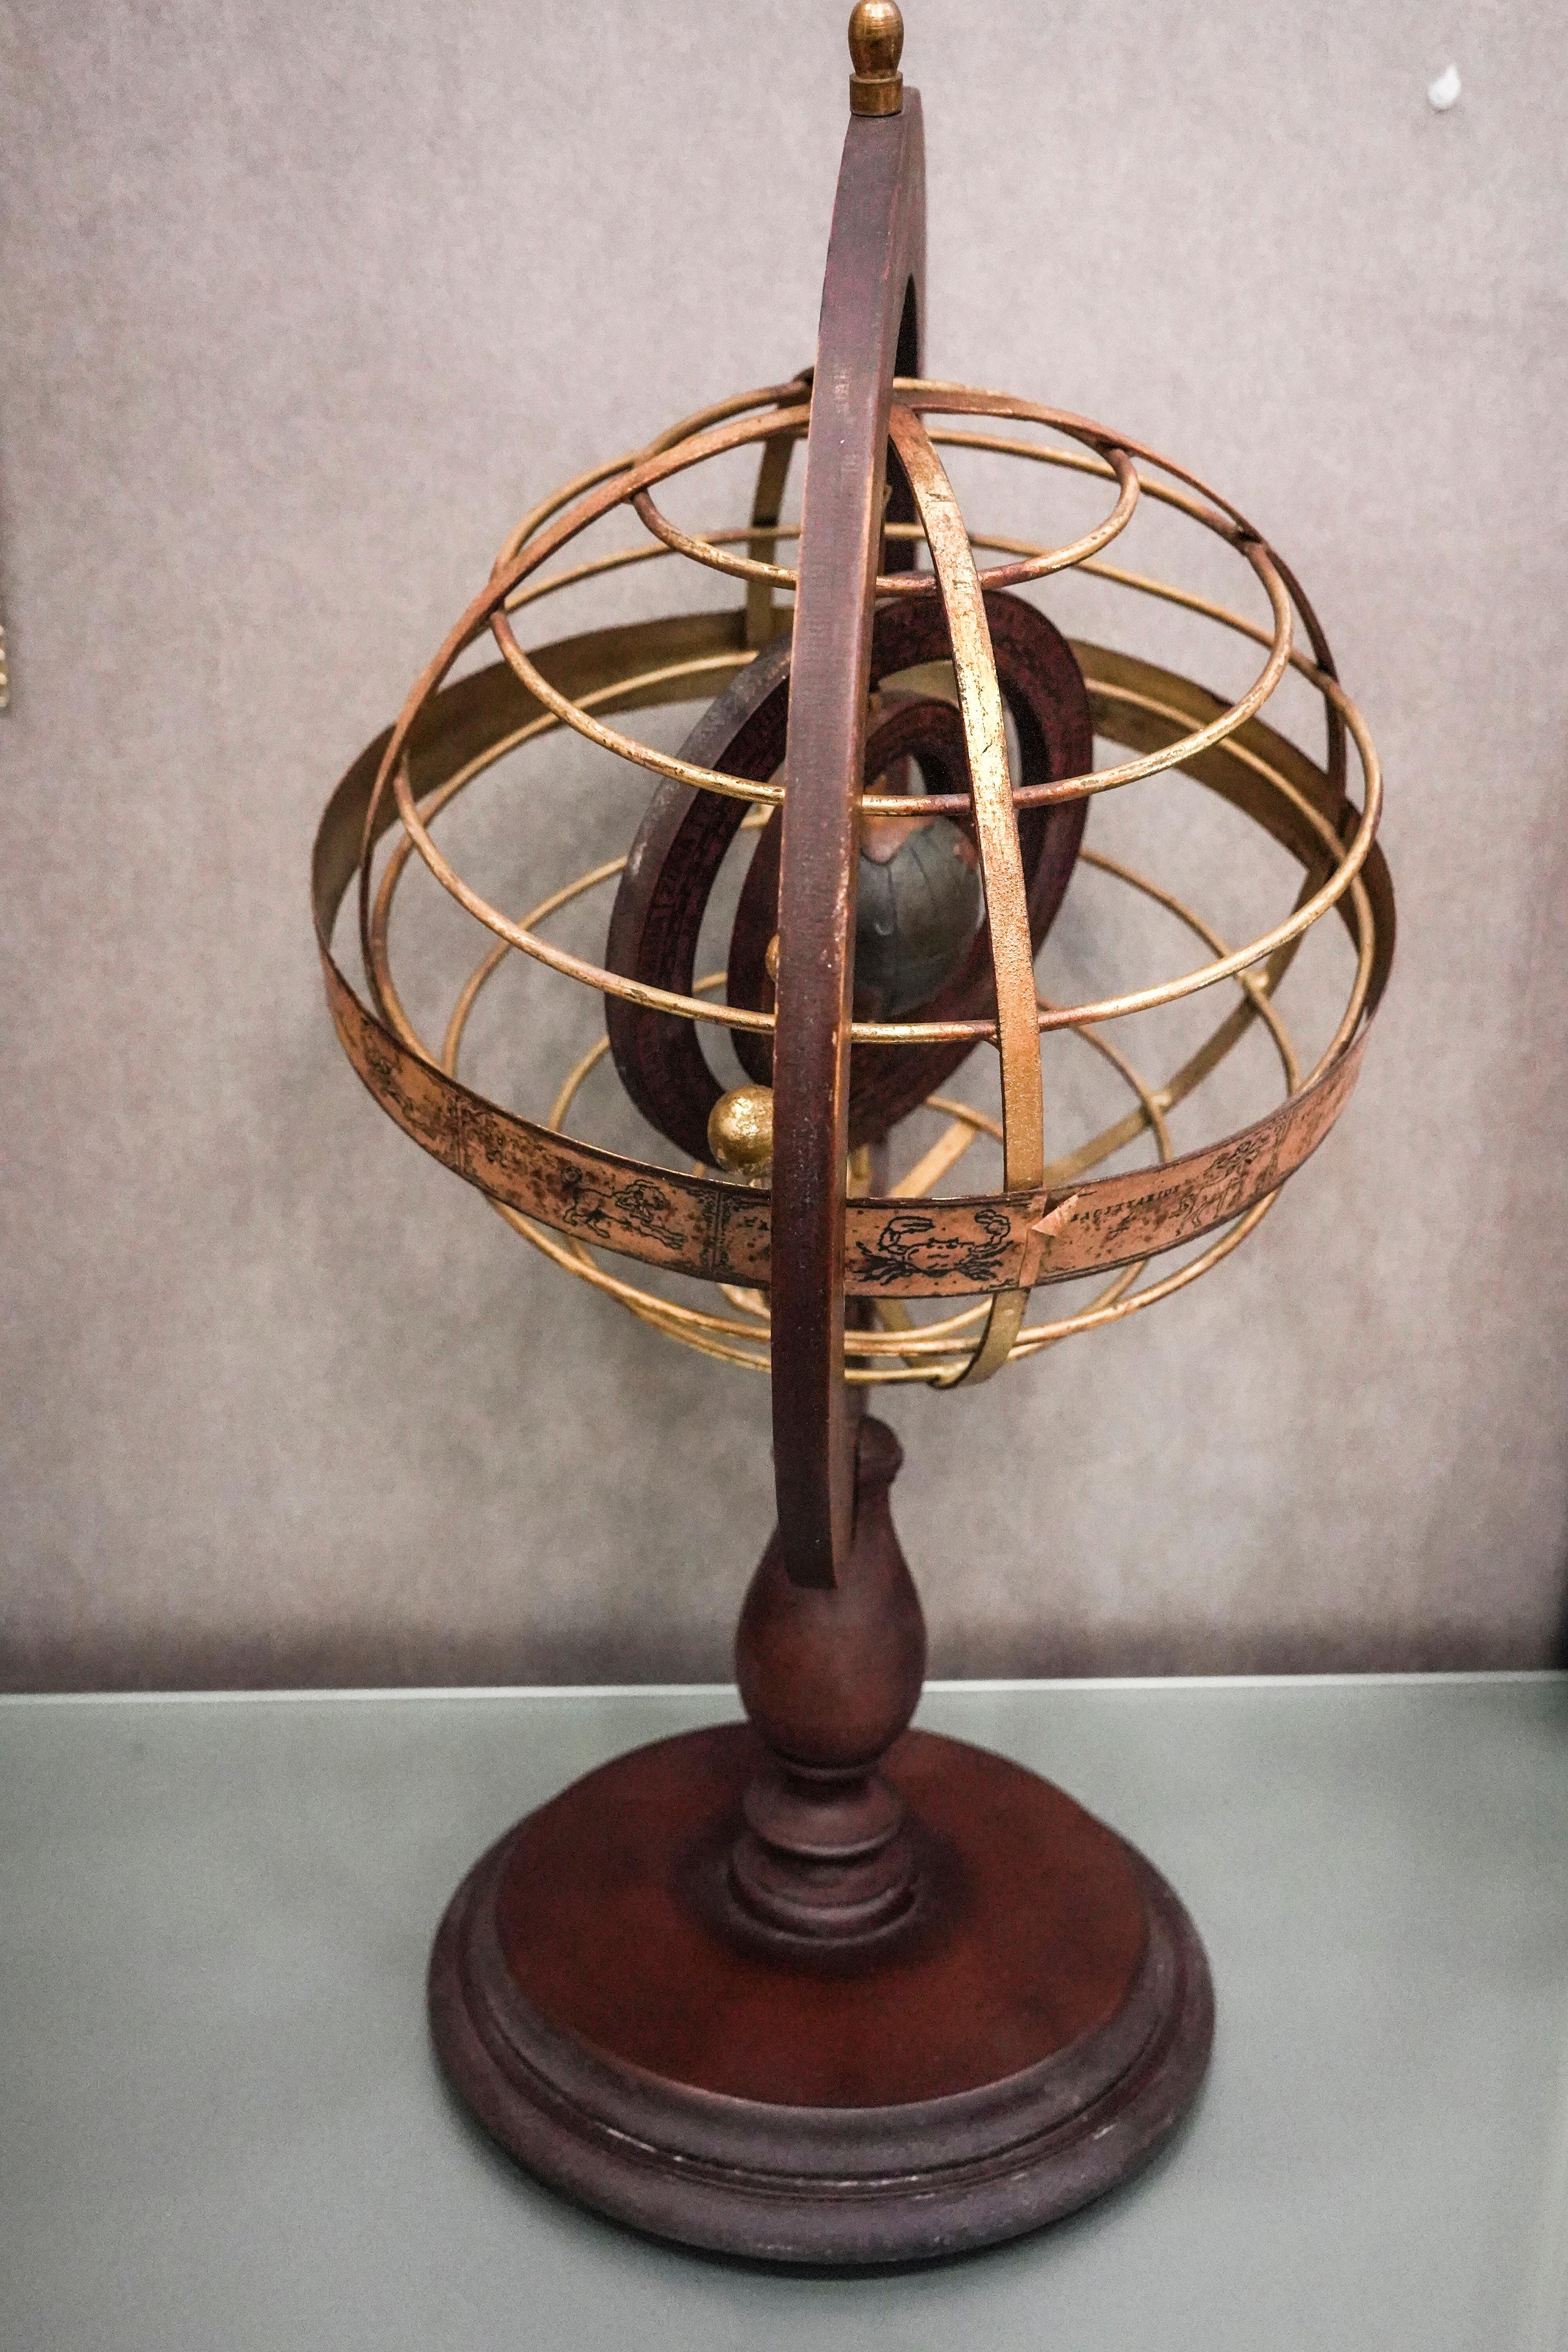 Carved 1920s Wood and Brass Armillary Sphere with Double Rotating Globe